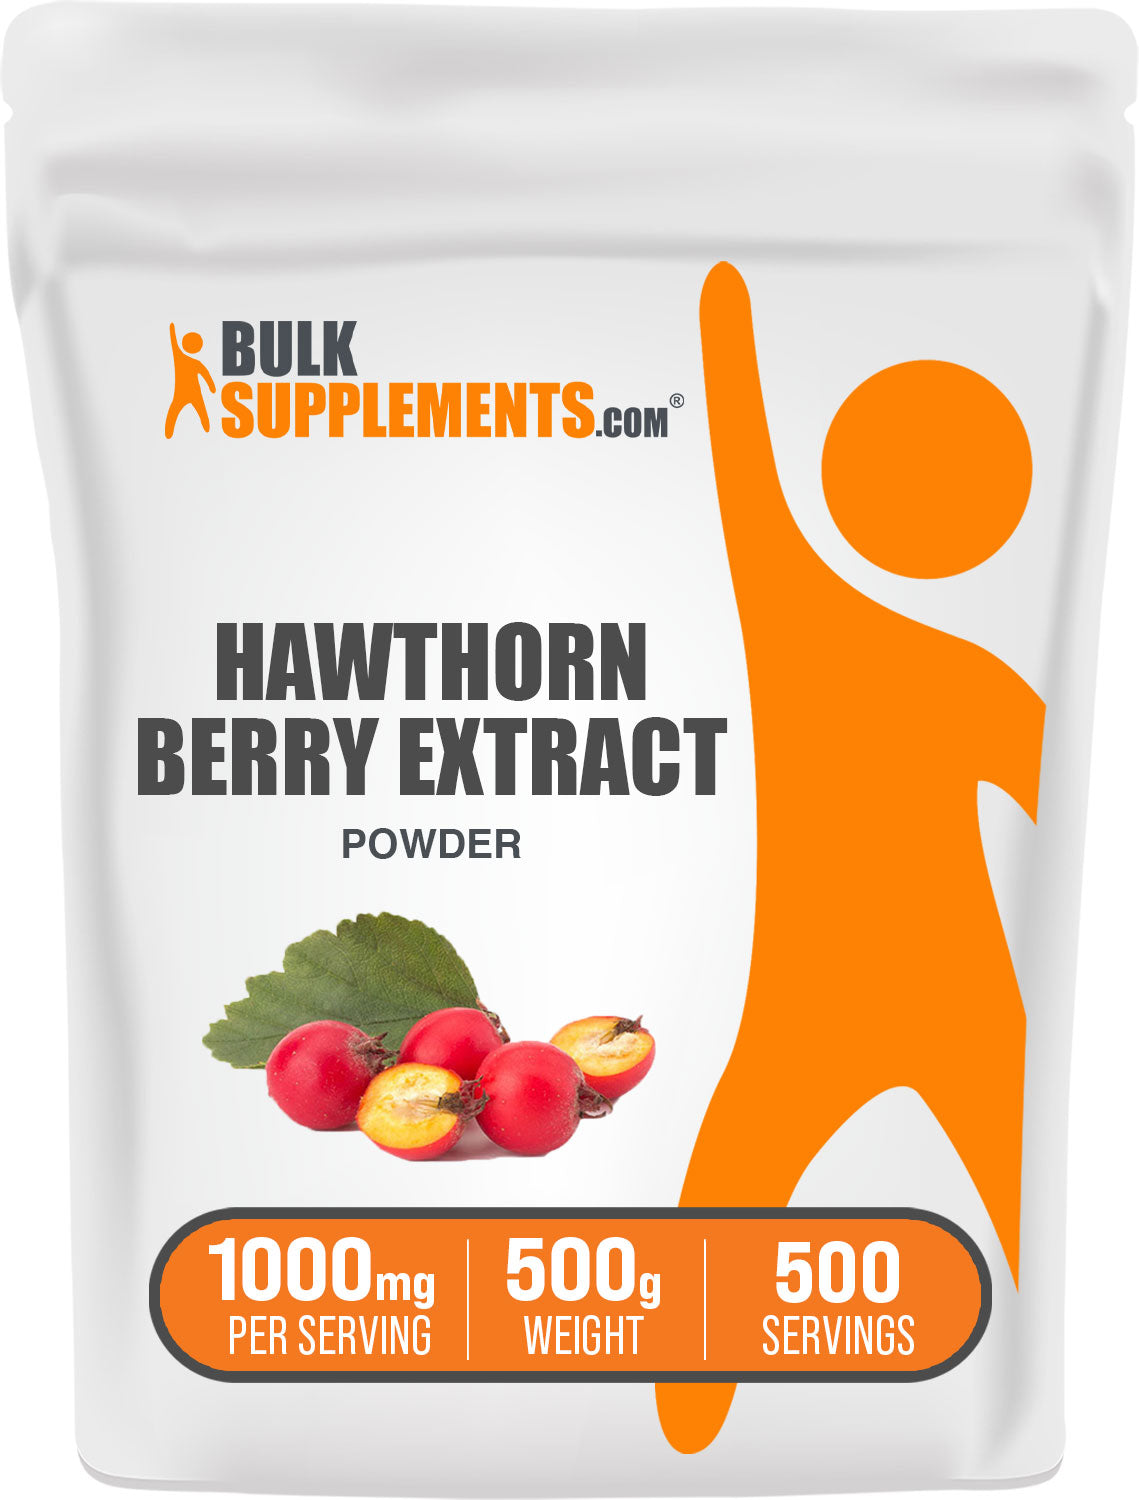 Hawthorn Berry Extract 500g